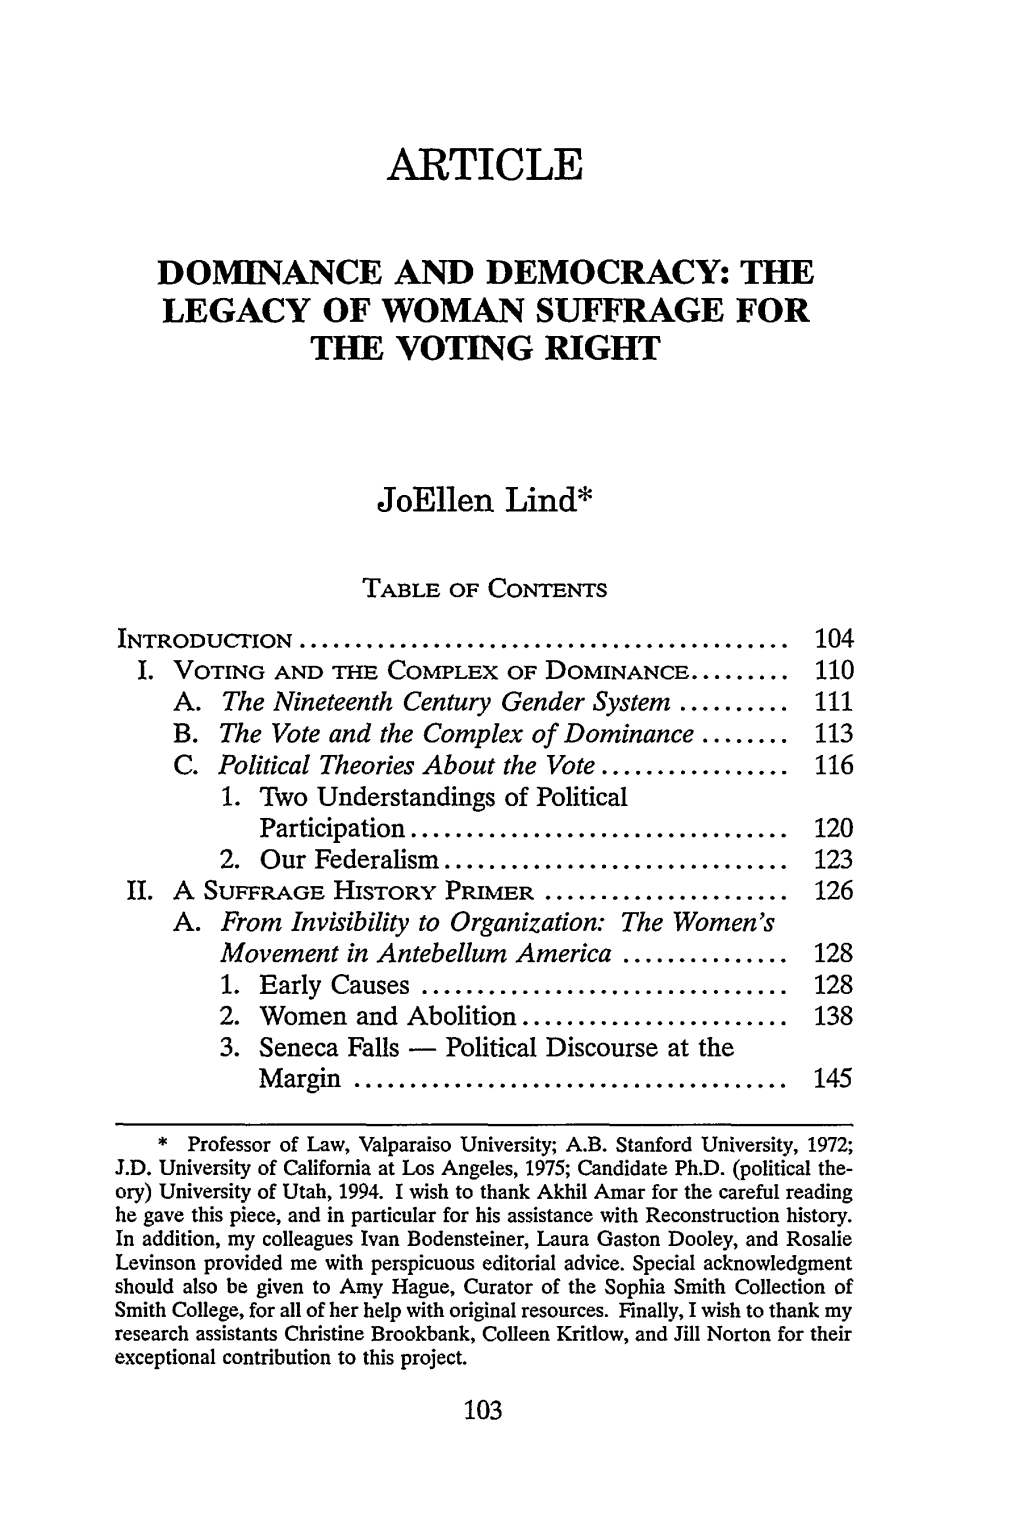 The Legacy of Woman Suffrage for the Voting Right